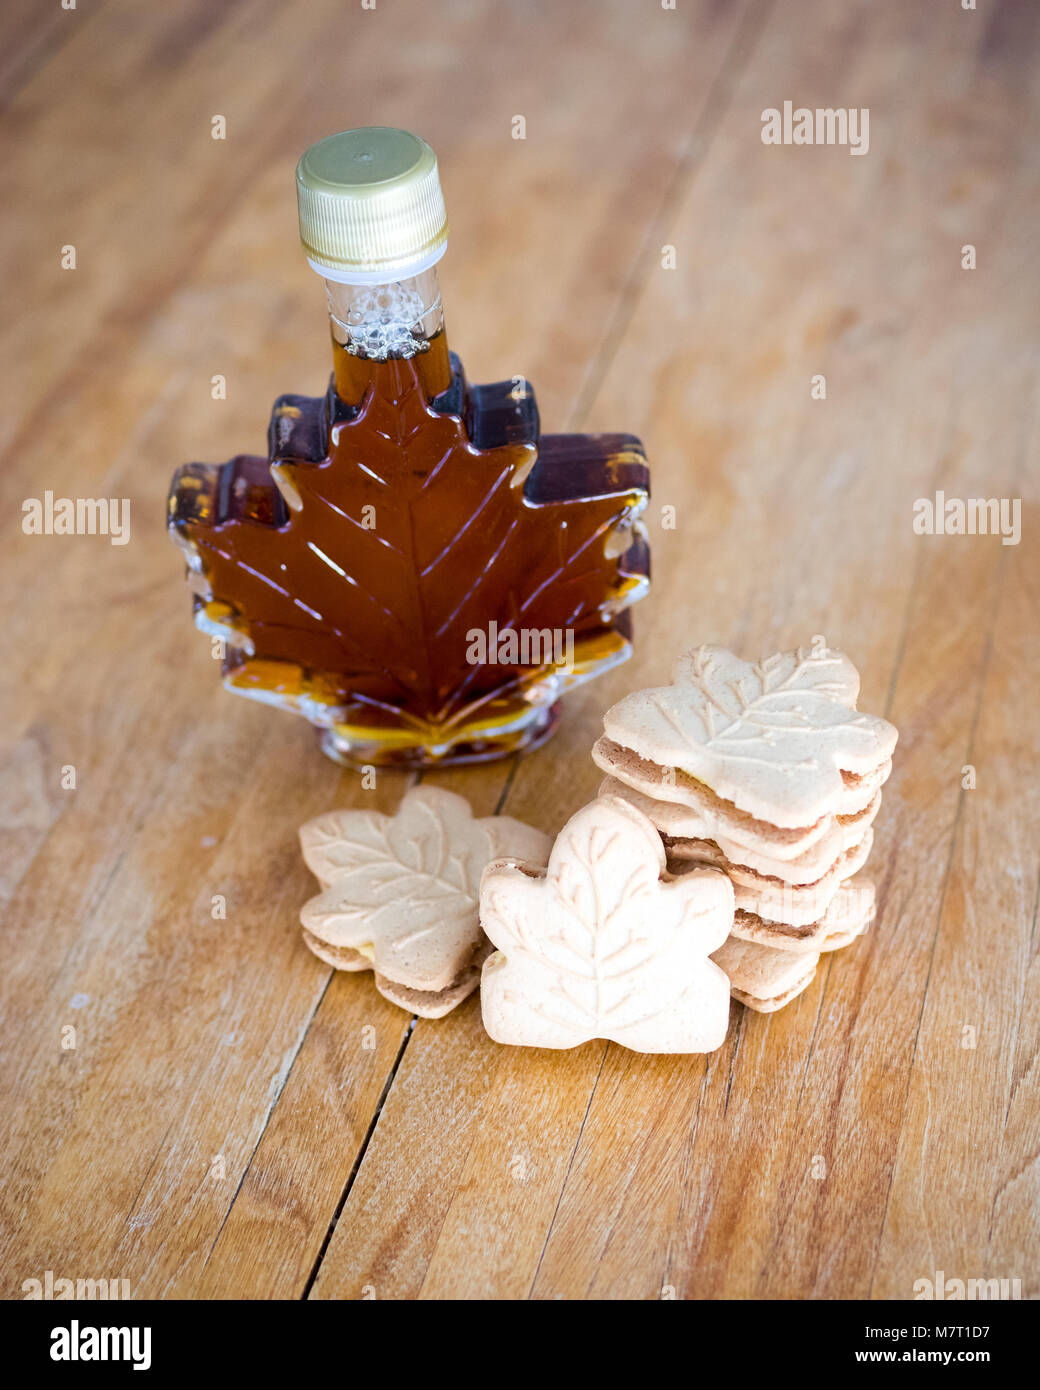 Delicious maple cookies (maple leaf cookies), made with real Canadian maple syrup. Stock Photo